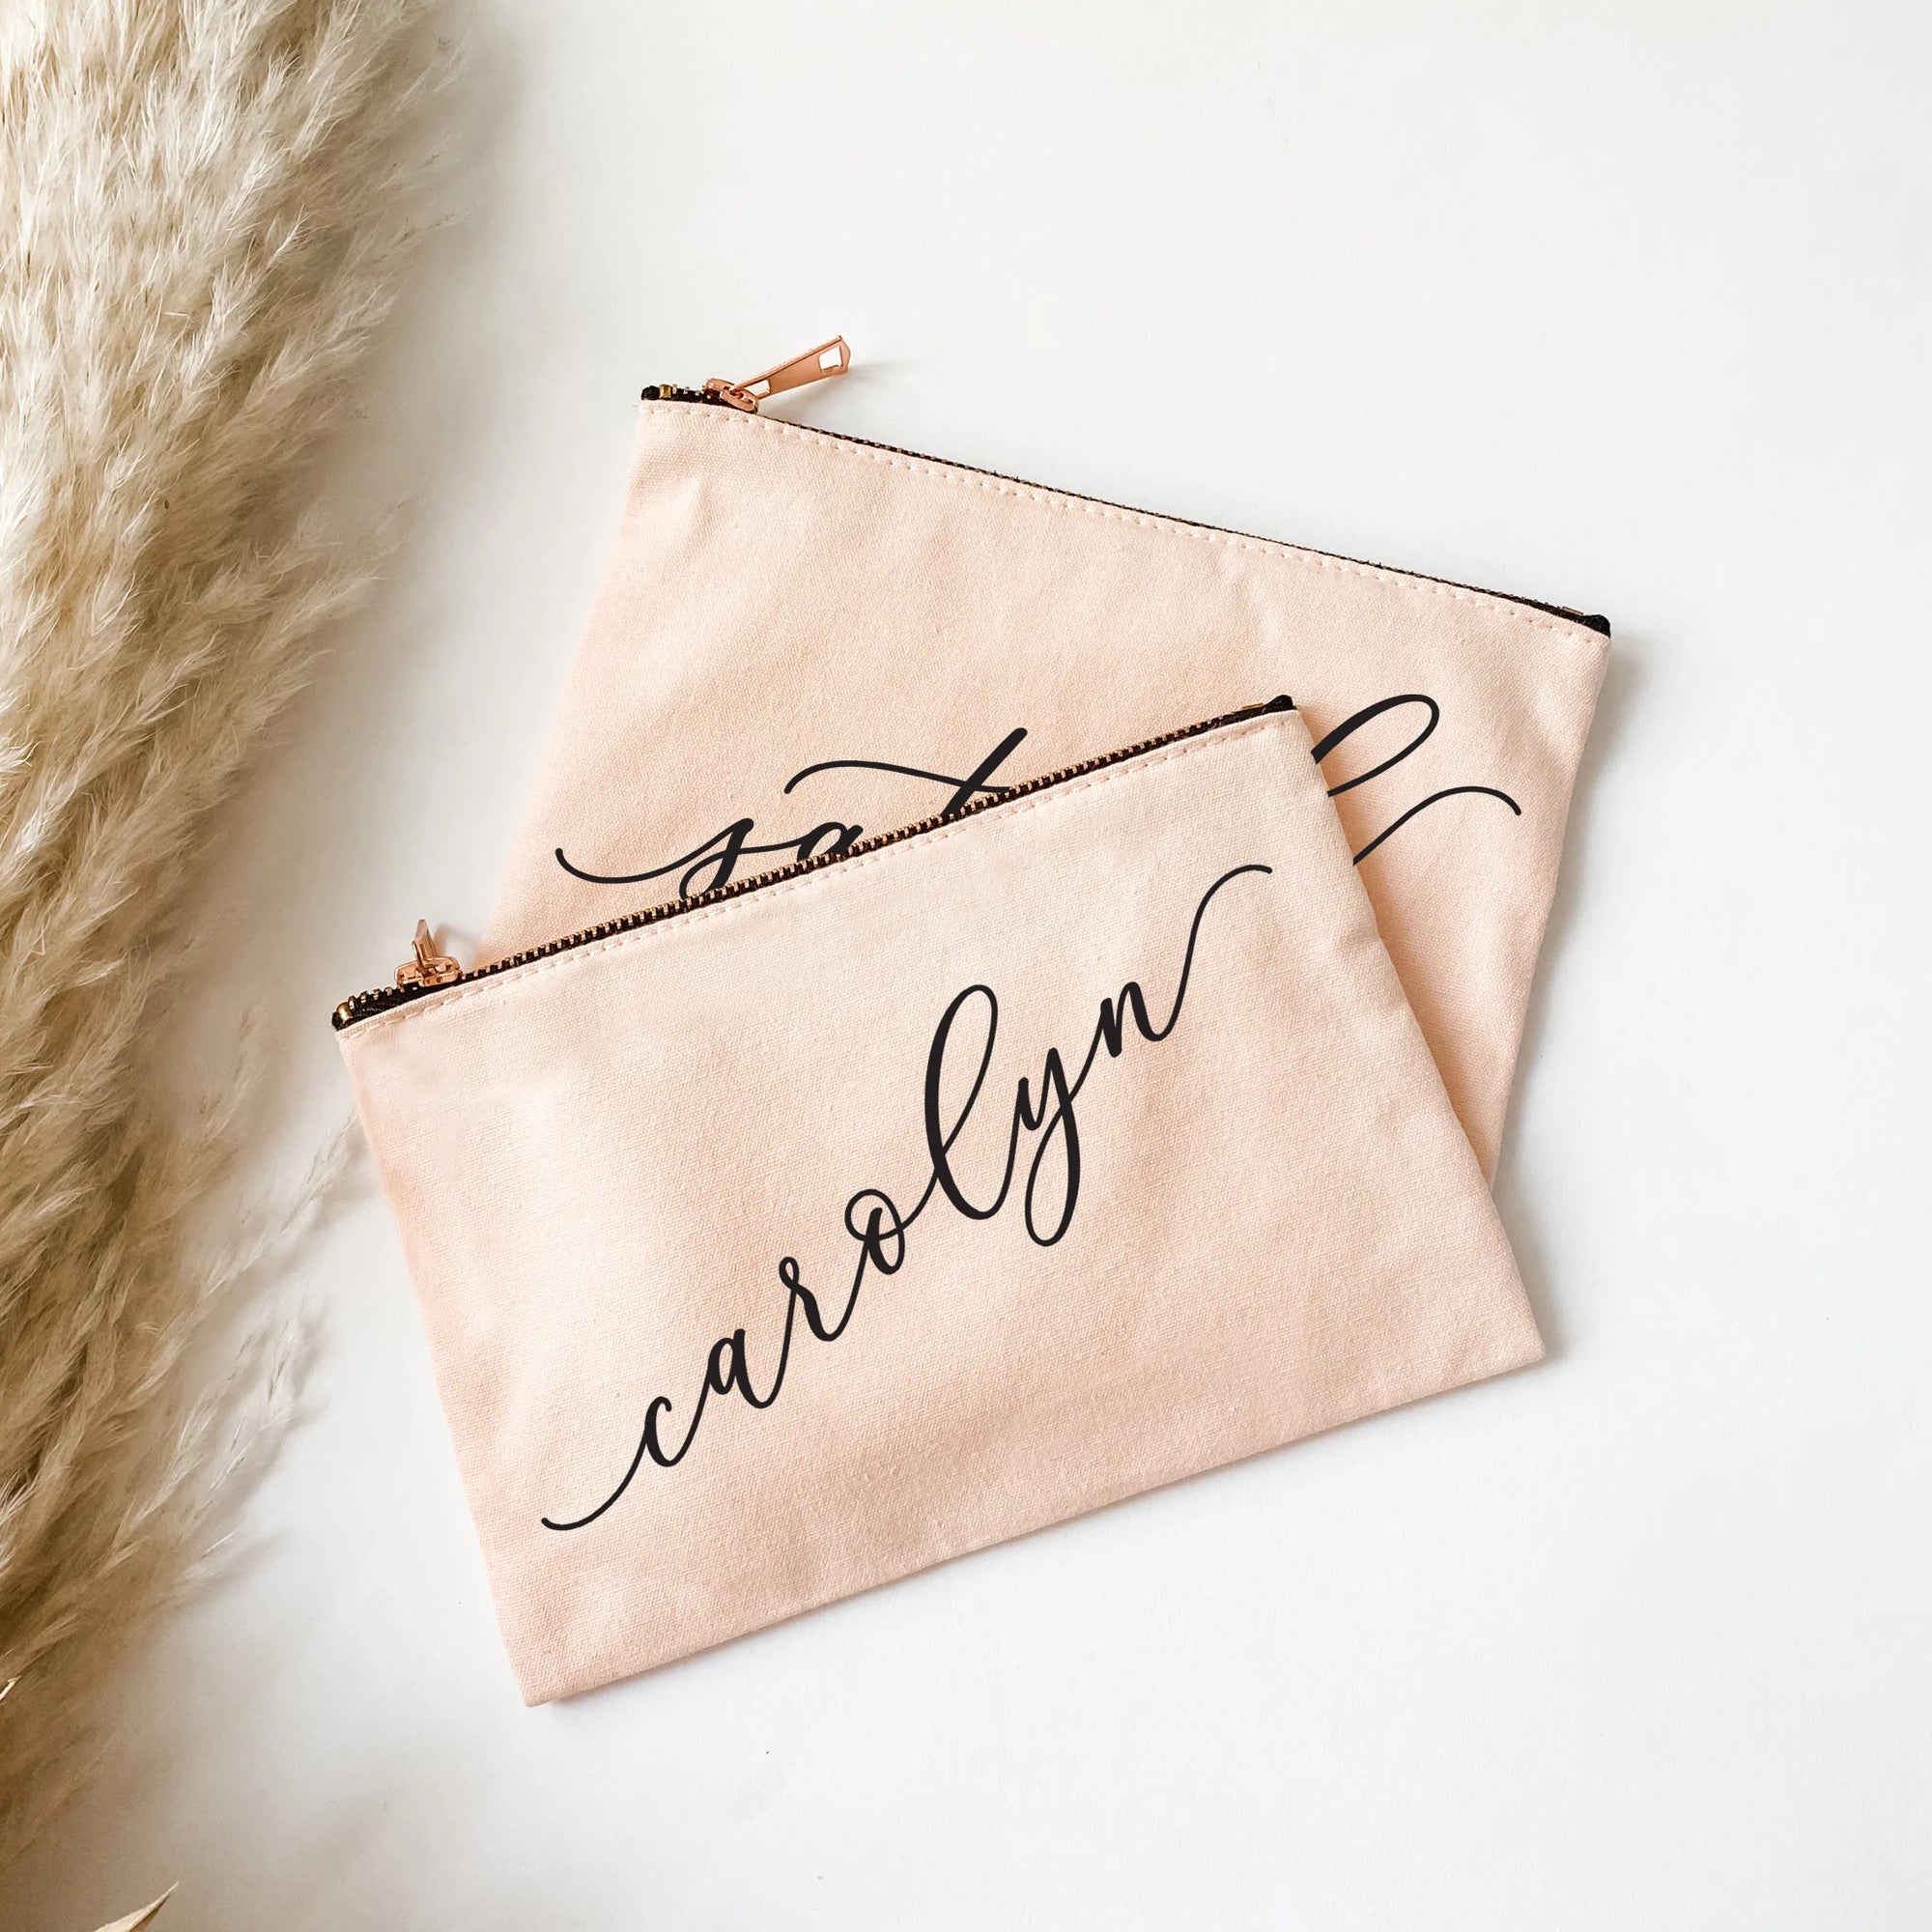 Cammys Cosmetic Clutch